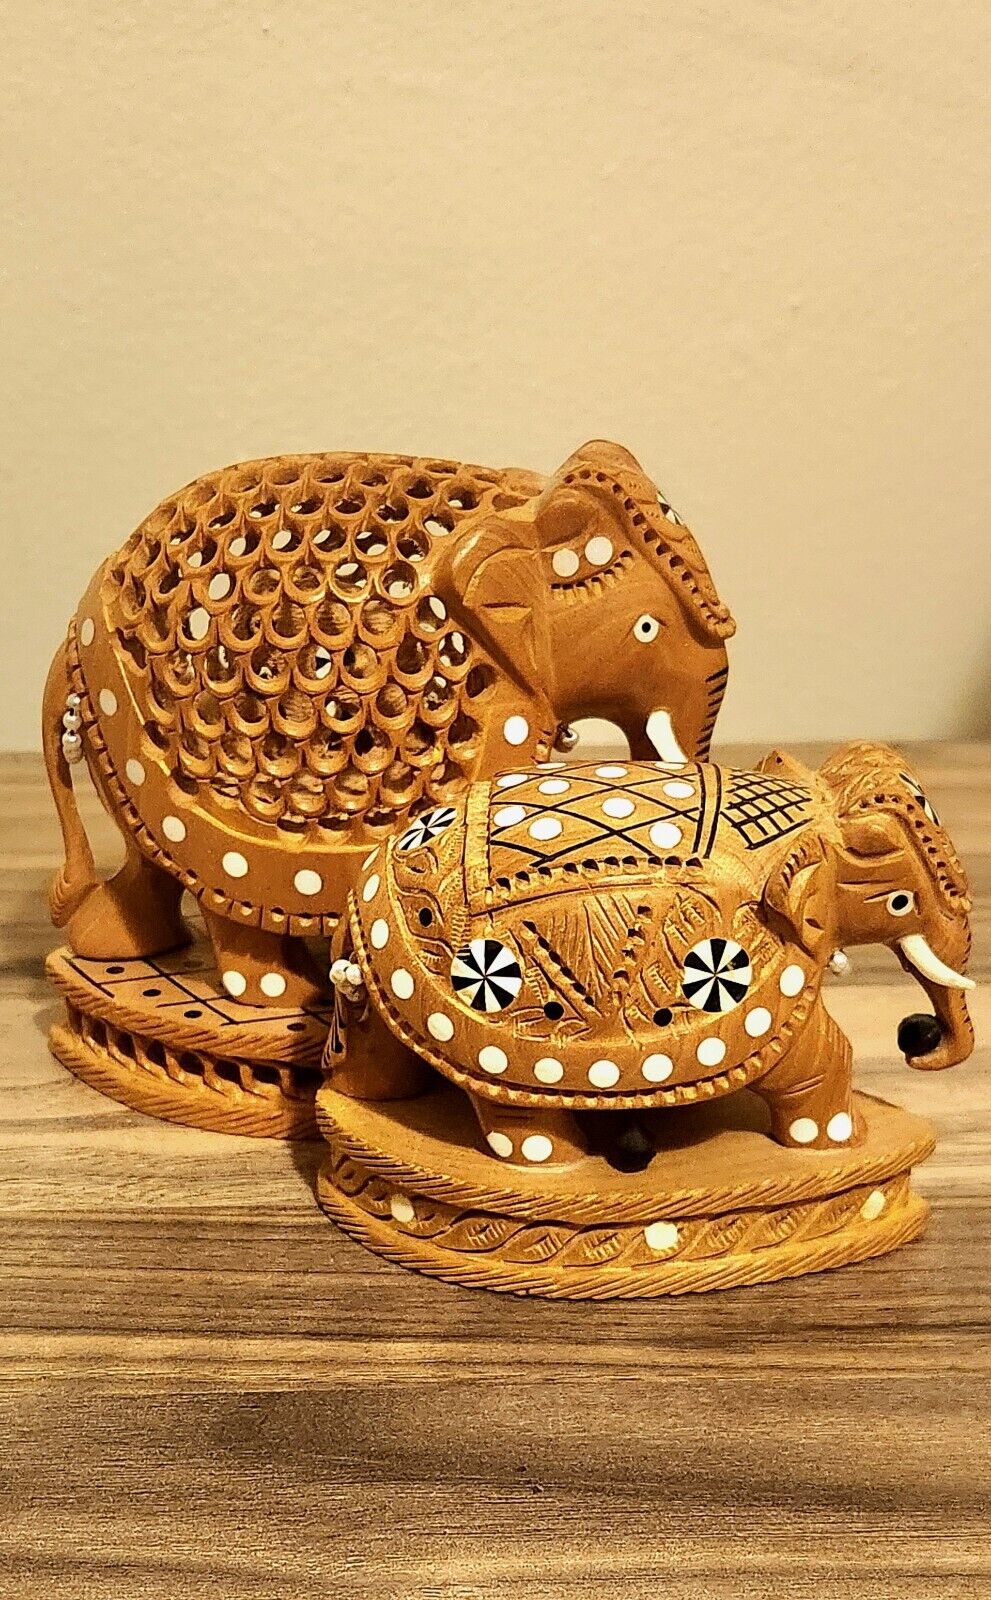 Wooden carving elephants handmade Home & Office Decorative gift